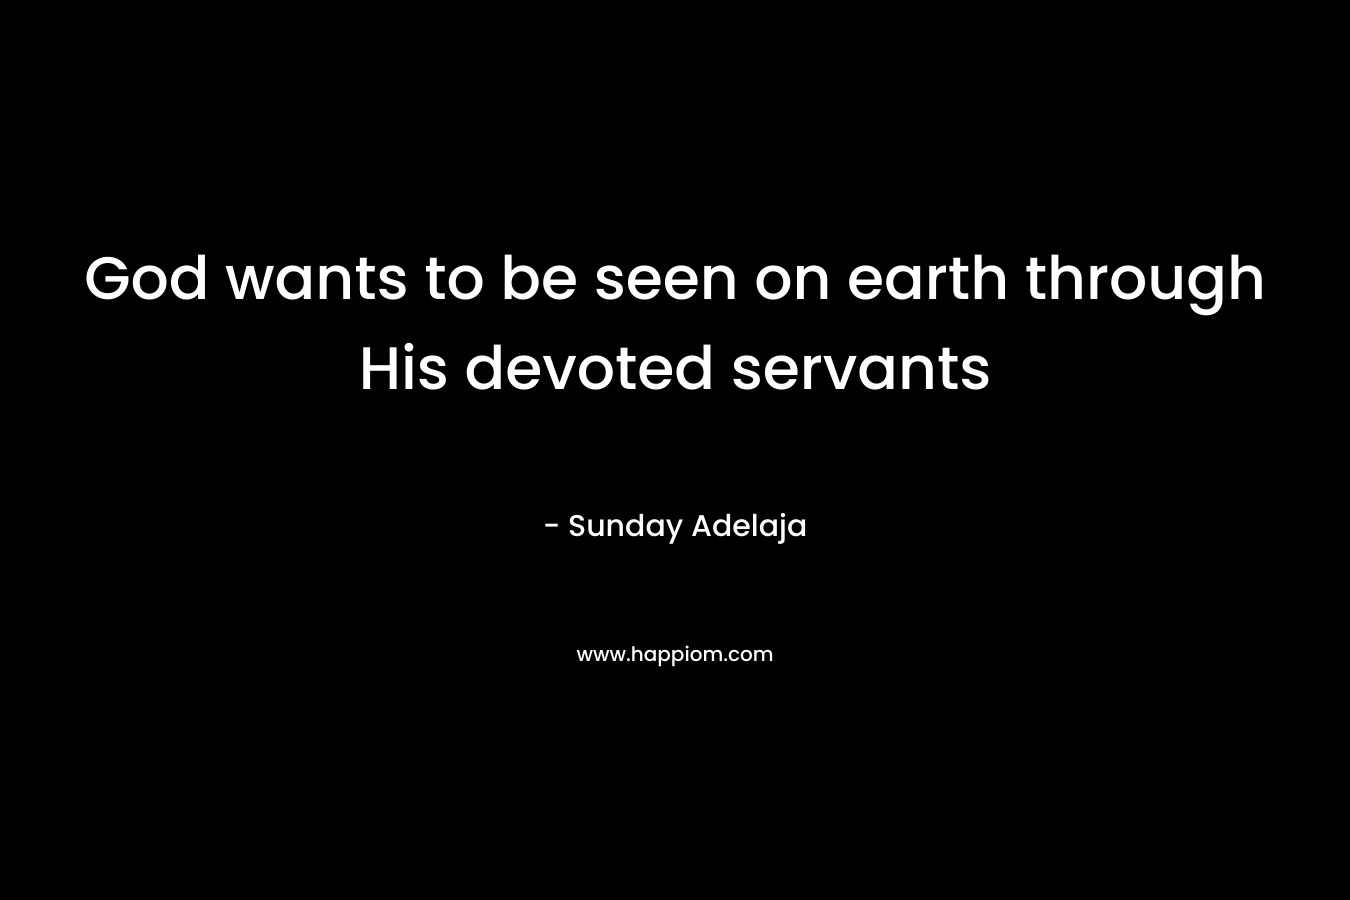 God wants to be seen on earth through His devoted servants